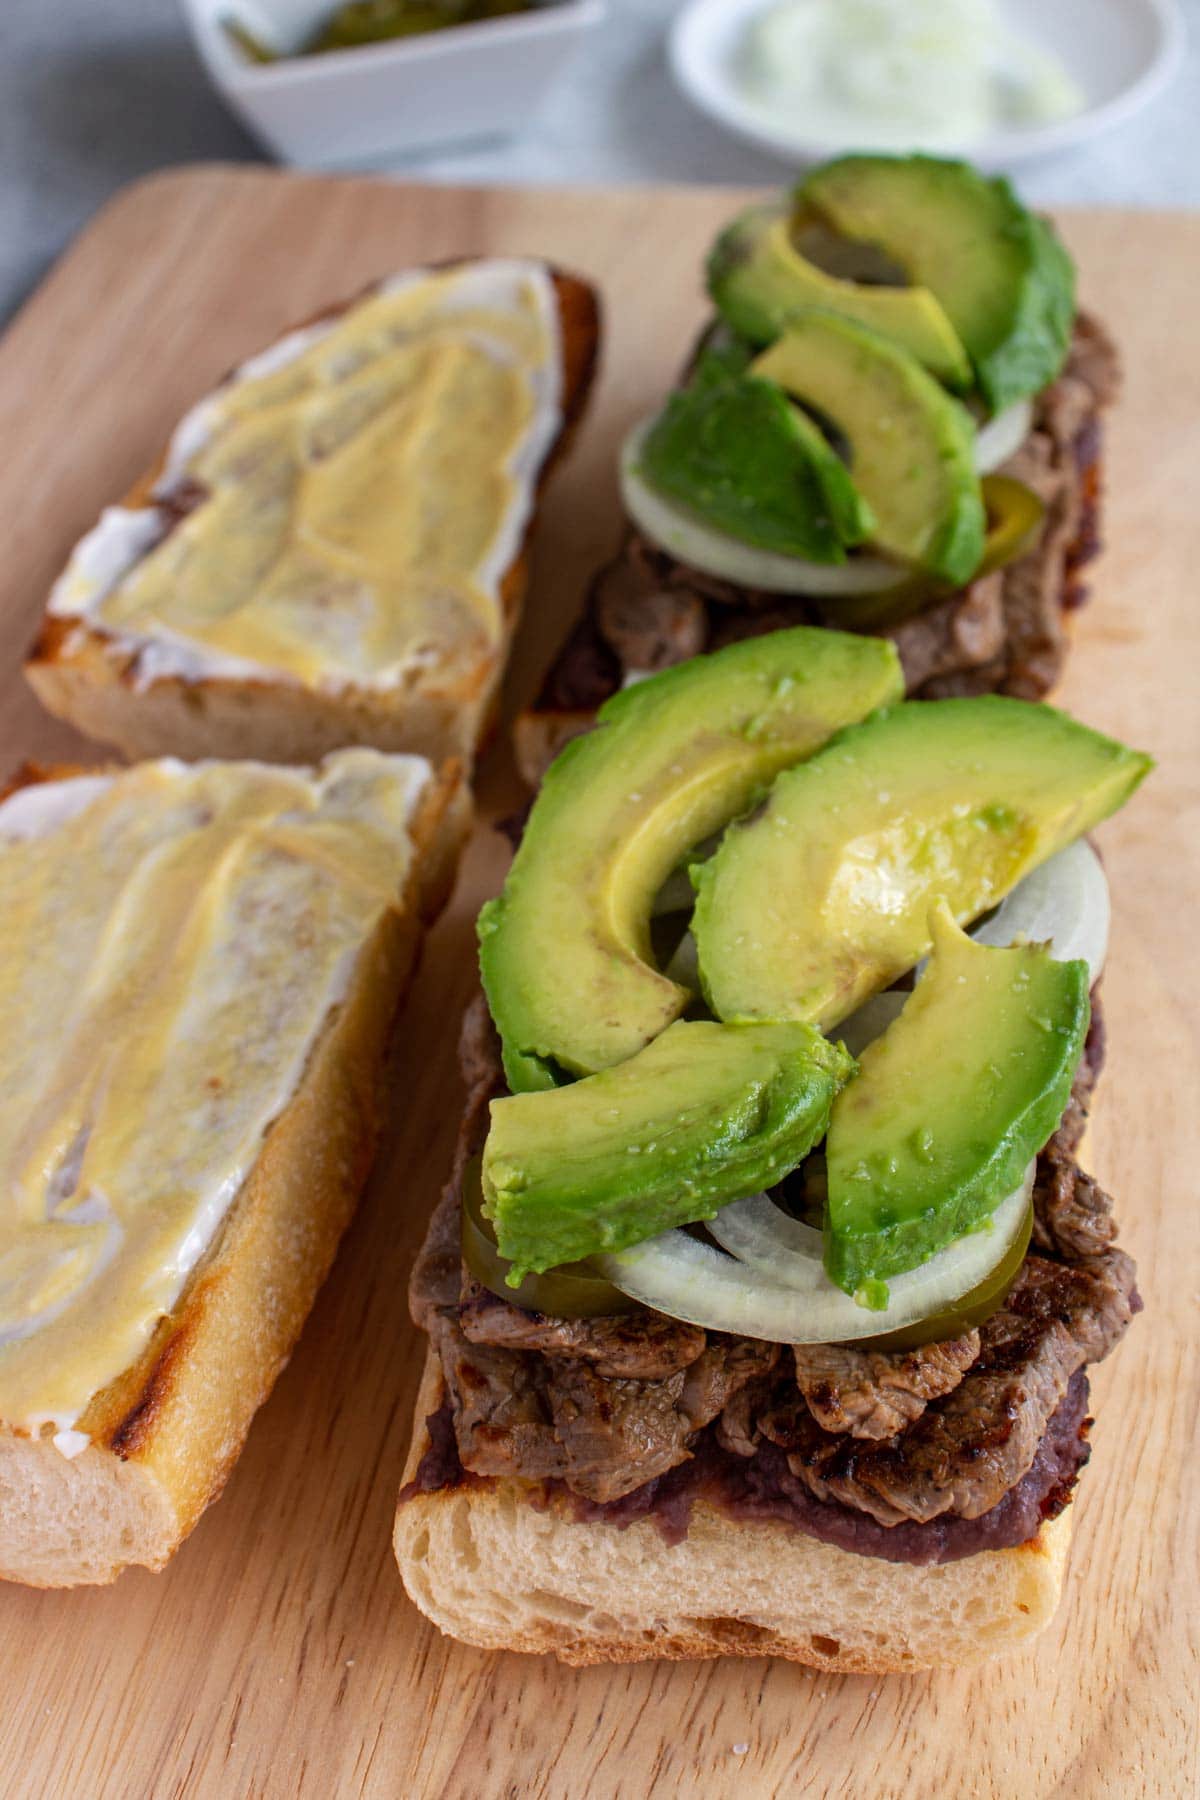 A baguette filled with steak, sliced onion and avocado with the bread lid on the side.